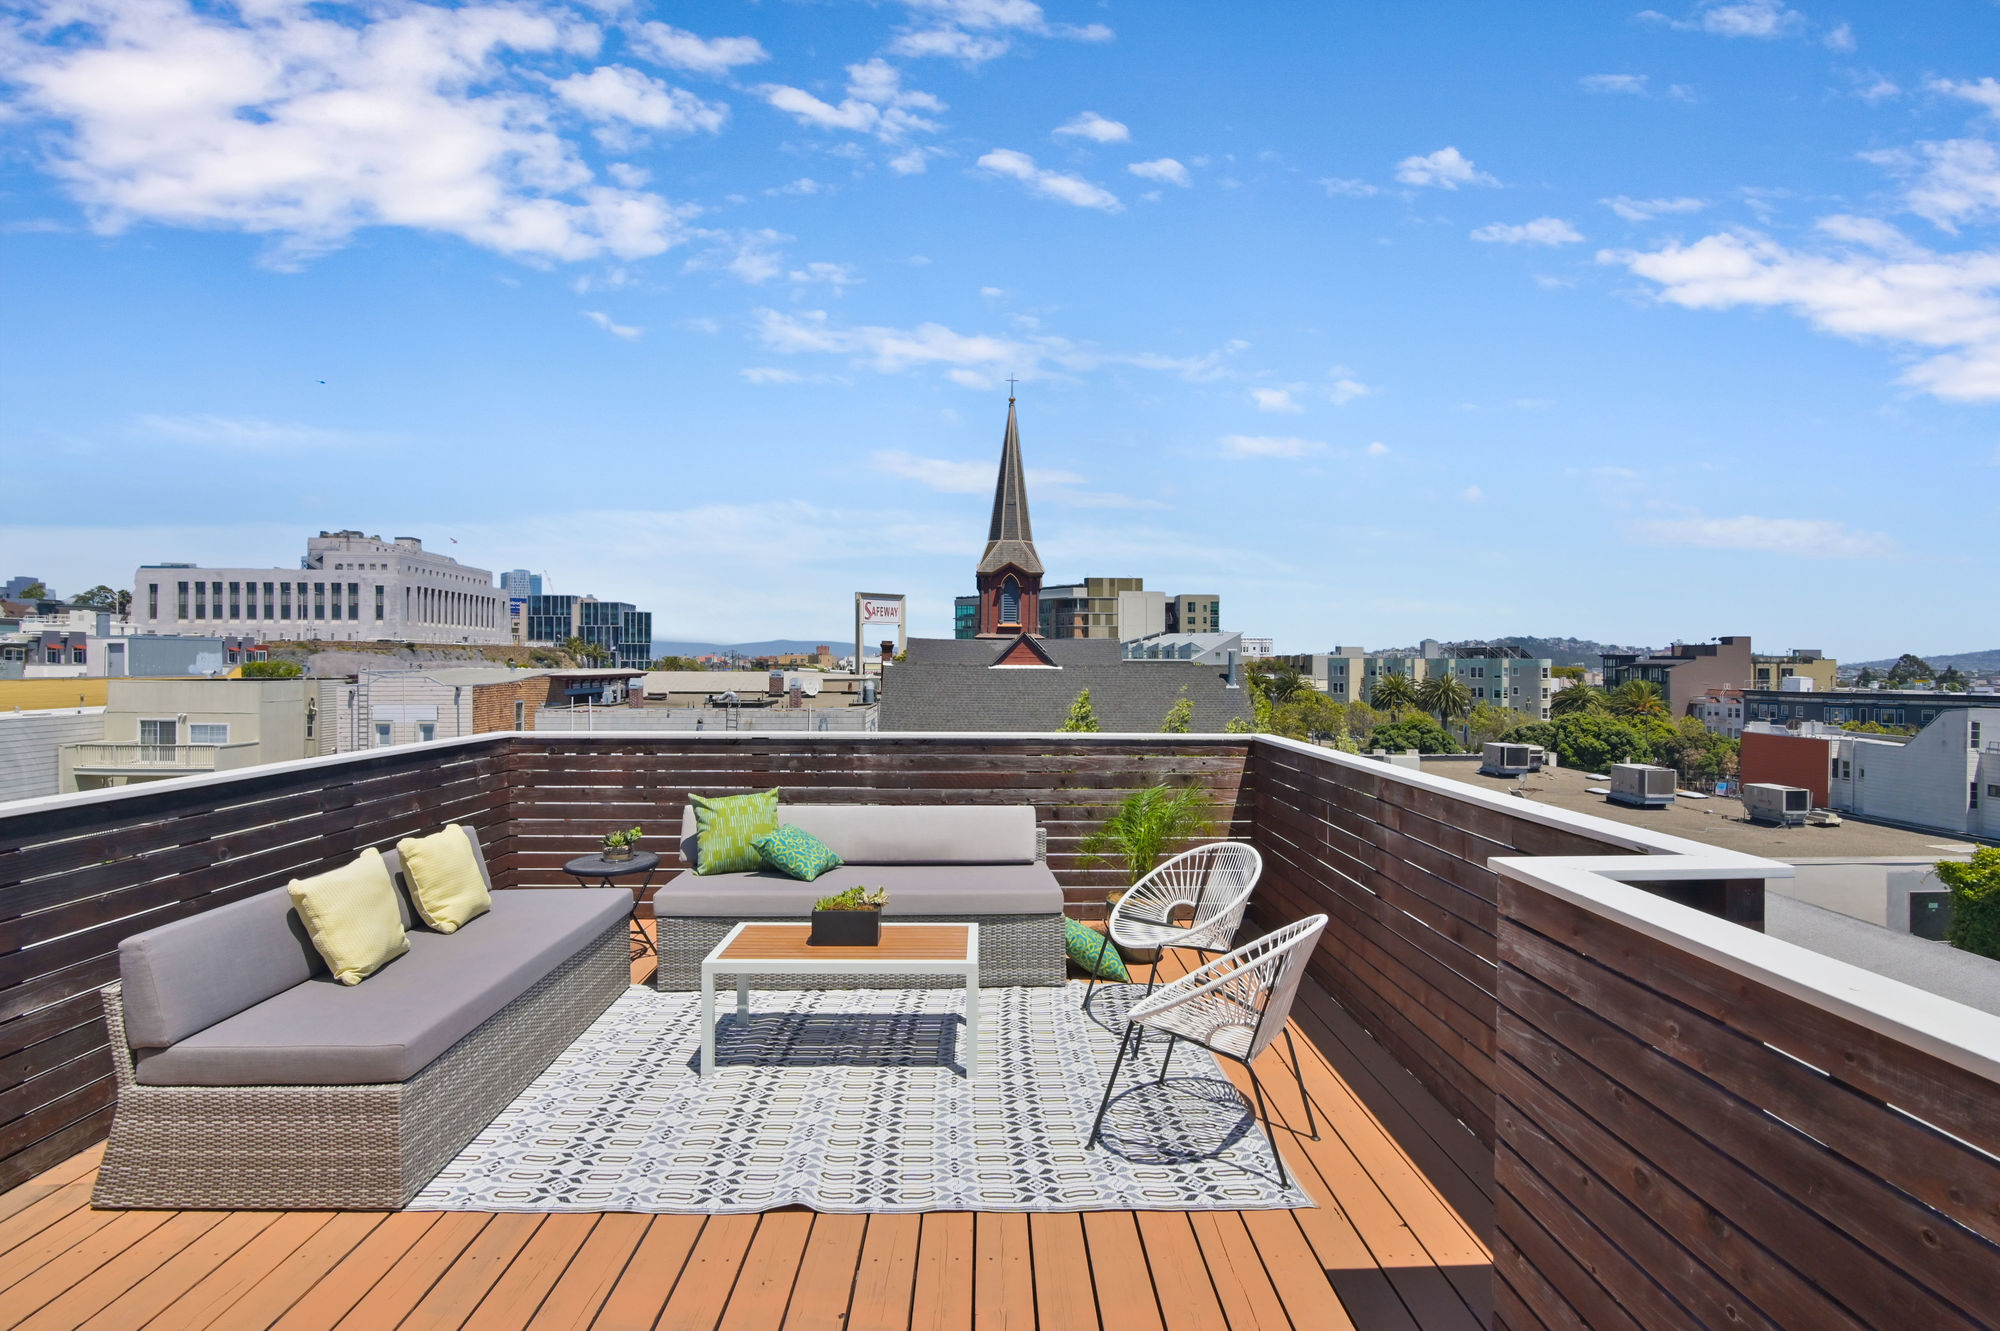 Property Photo: View for the top deck at 45-49 Belcher Street, showing panoramic views of the city